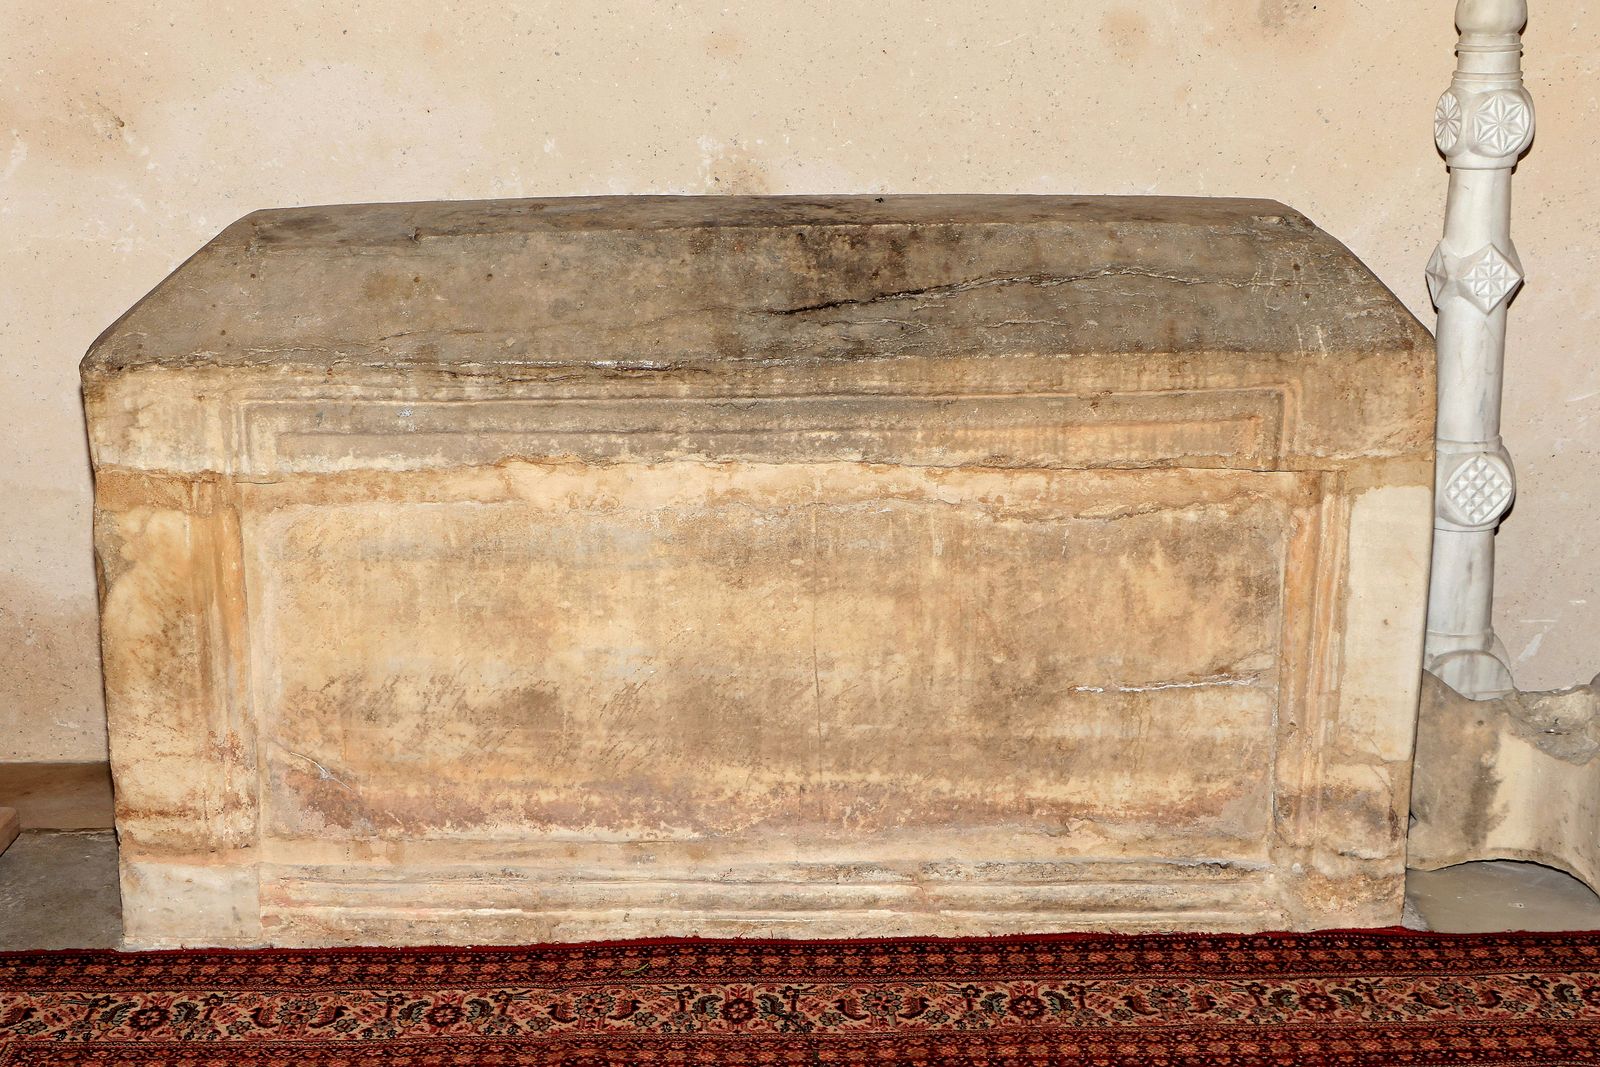 Marble sarcophagus of an unidentified person